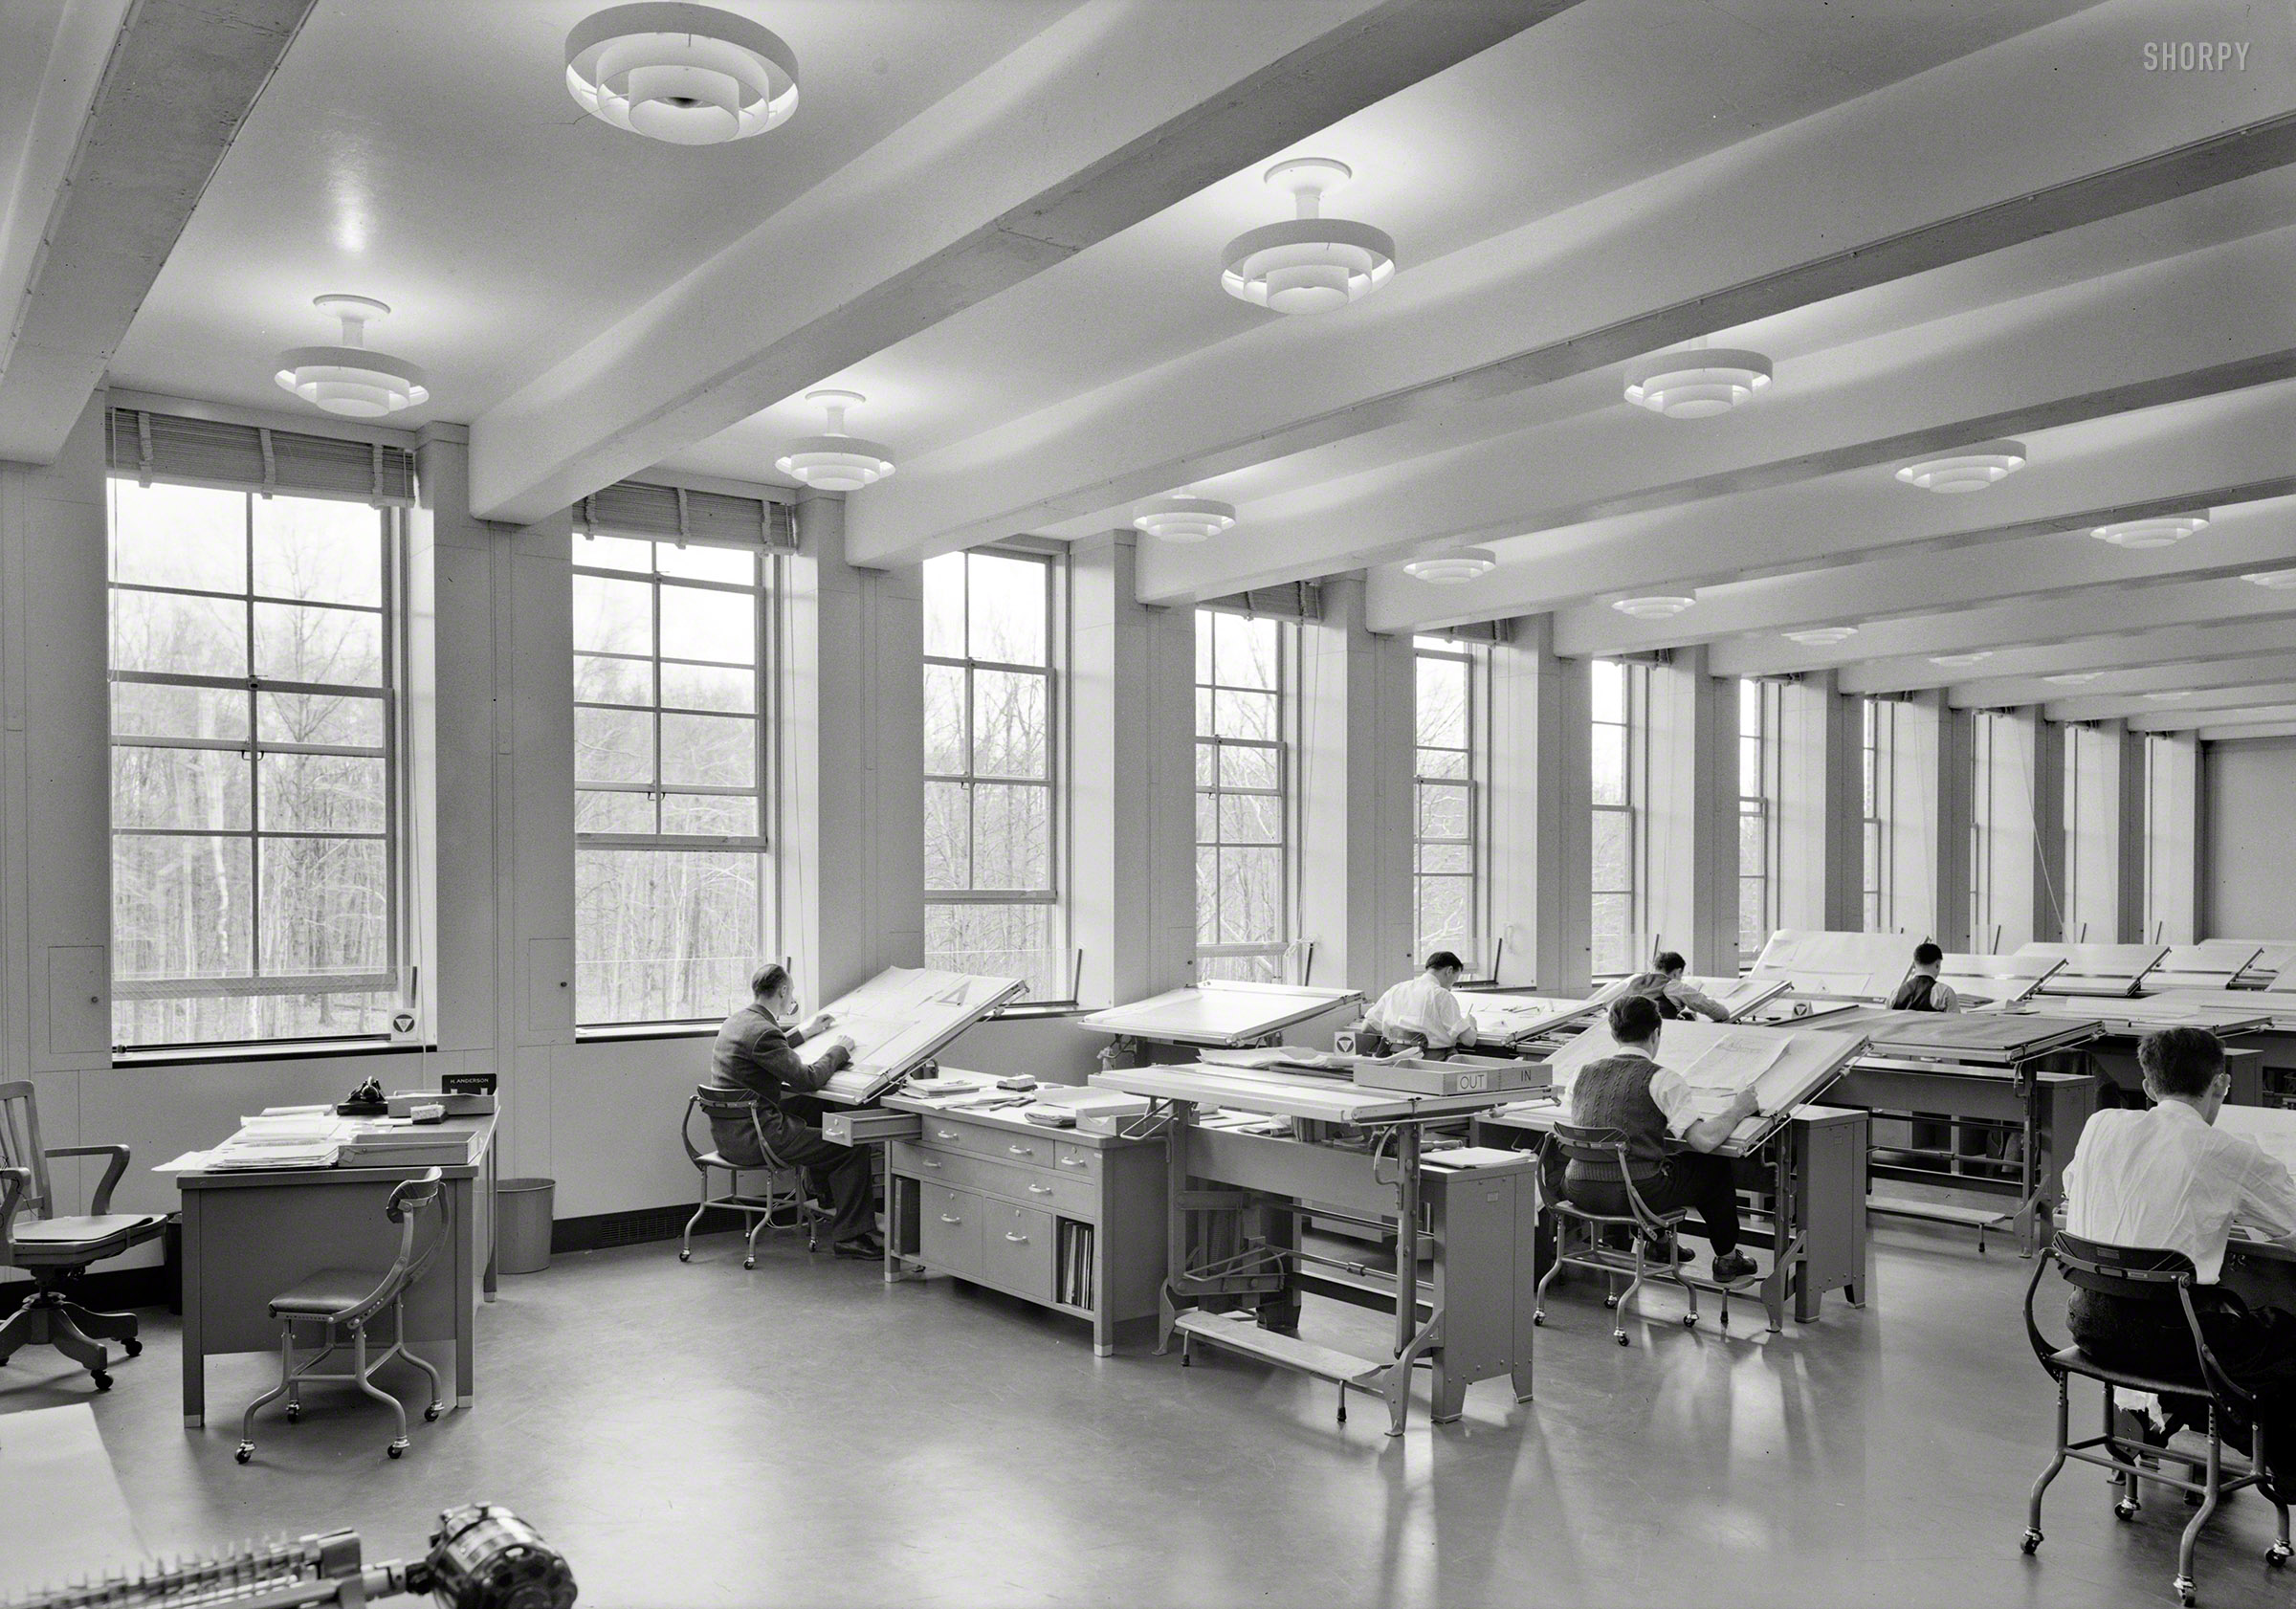 March 19, 1942, in the birthplace of the transistor. "Bell Telephone Laboratories, Murray Hill, New Jersey. Drafting room. Voorhees, Walker, Foley & Smith, architect." Large-format acetate negative by Gottscho-Schleisner. View full size.